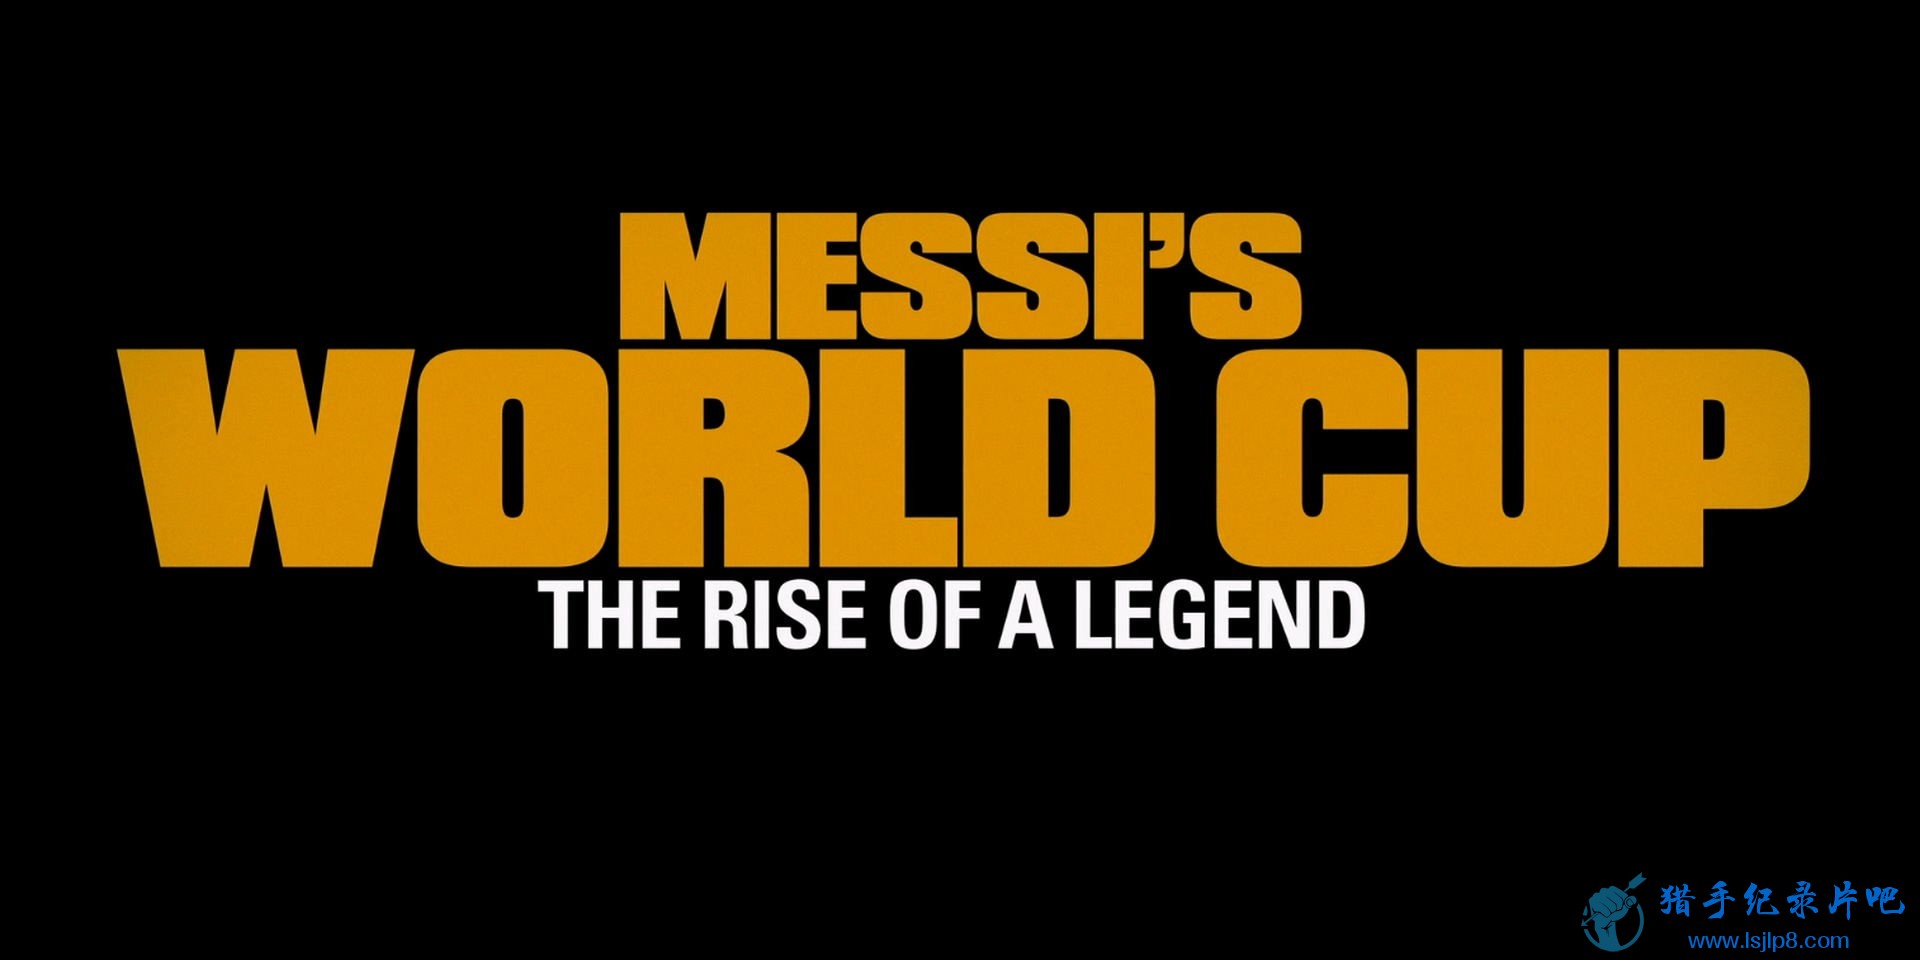 messis.world.cup.the.rise.of.a.legend.s01e01.1080p.web.h264-successfulcrab.jpg